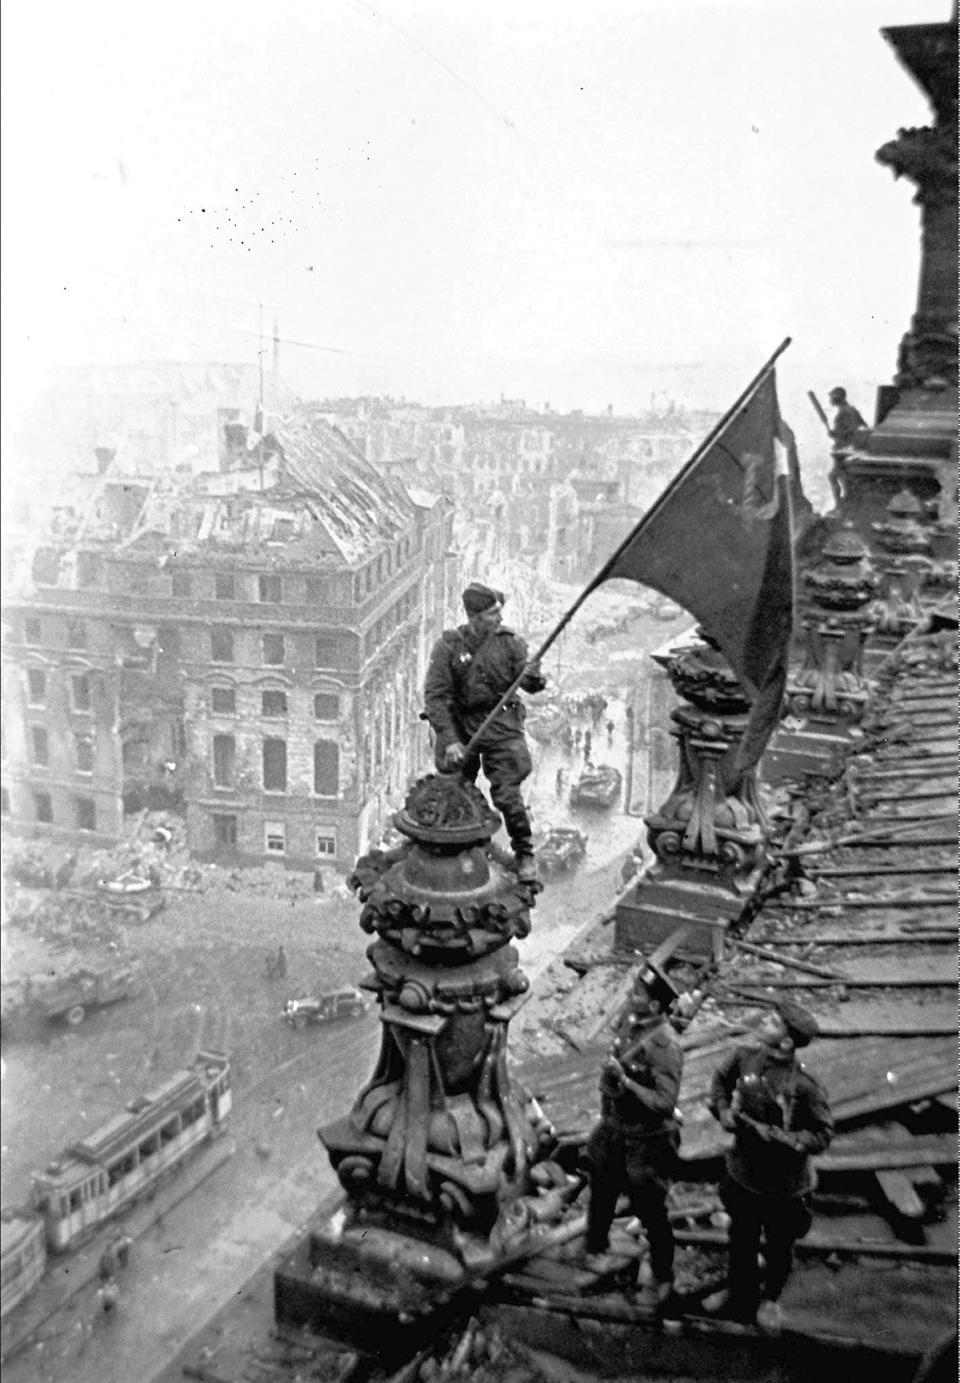 FILE - Soviet soldiers hoist the red flag over the Reichstag in Berlin, Germany in May 1945. The photo was made by Yevgeny Khaldei, a veteran photographer whose pictures of Soviet soldiers hoisting the red flag over the Reichstag in Berlin are among the best-known images of World War II. The Red Army doggedly pushed back the Nazis and slowly advanced until reaching Berlin, ending the war's European theater. (Yevgeny Khaldei, ITAR-TASS via AP, File)